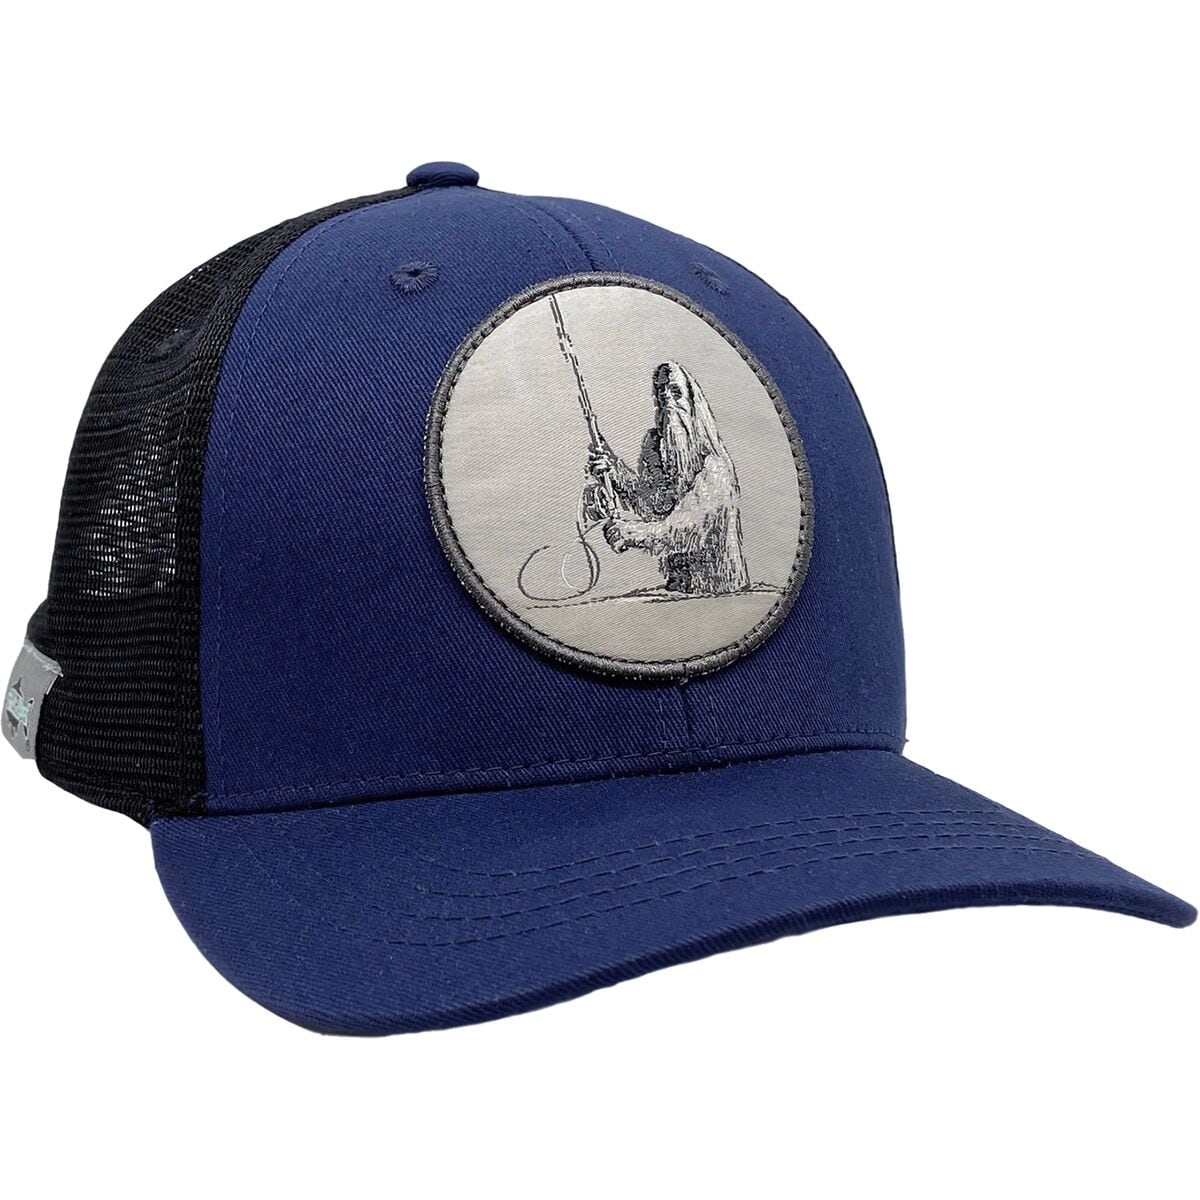 Rep Your Water Swing. Squatch. Repeat Trucker Hat